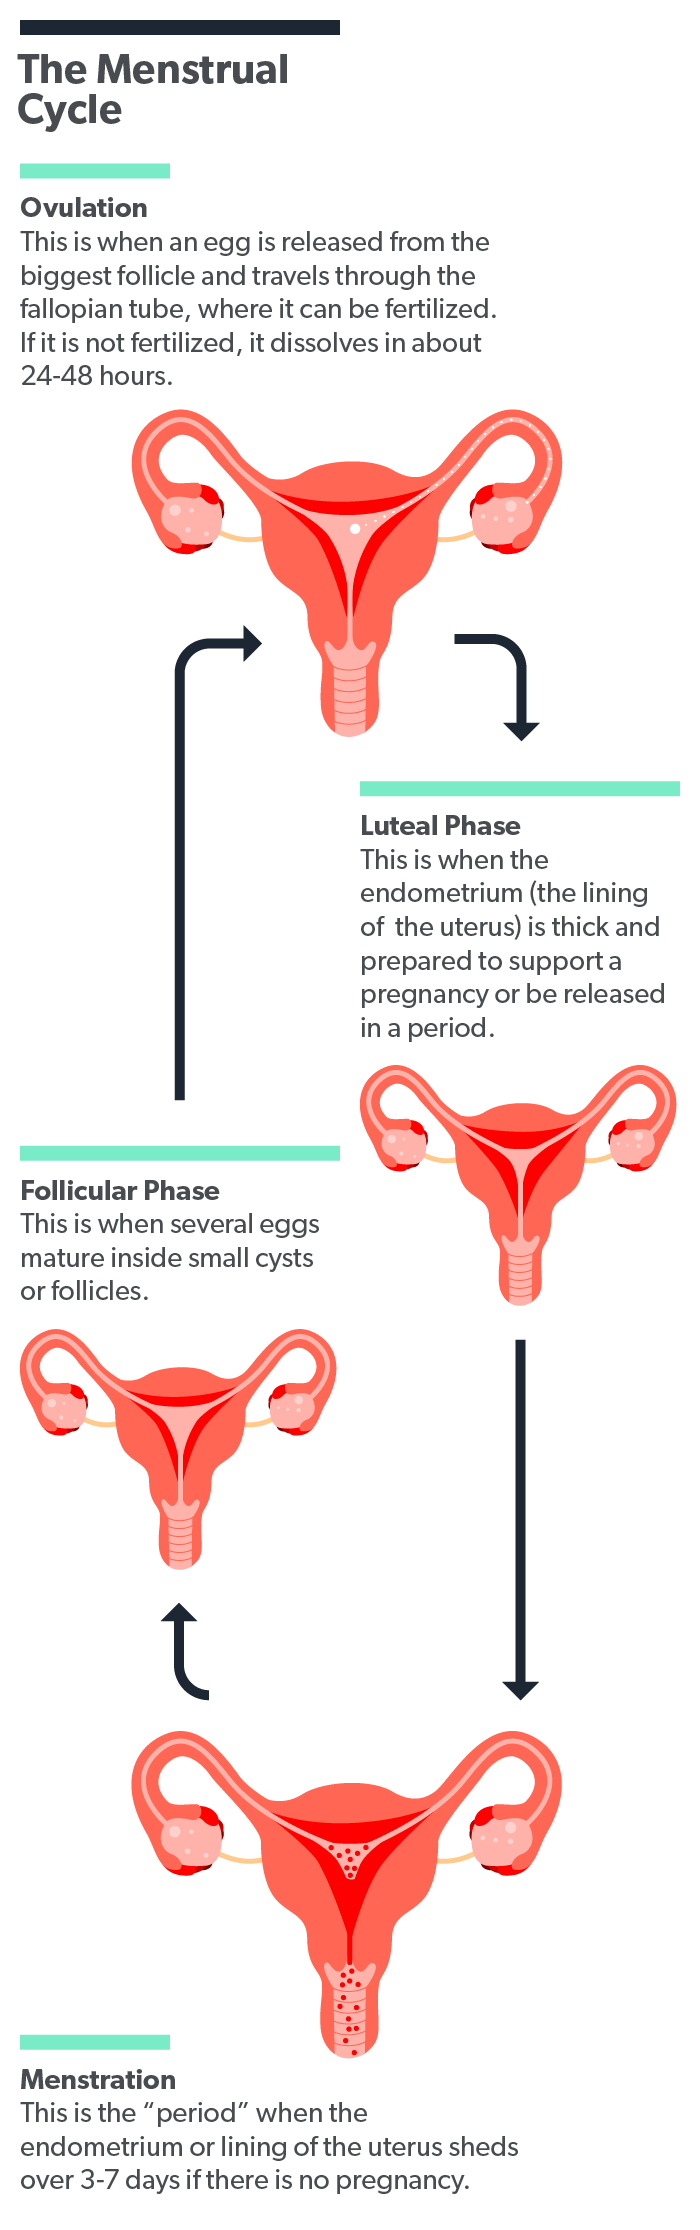 Luteal phase deficiency in regularly menstruating women